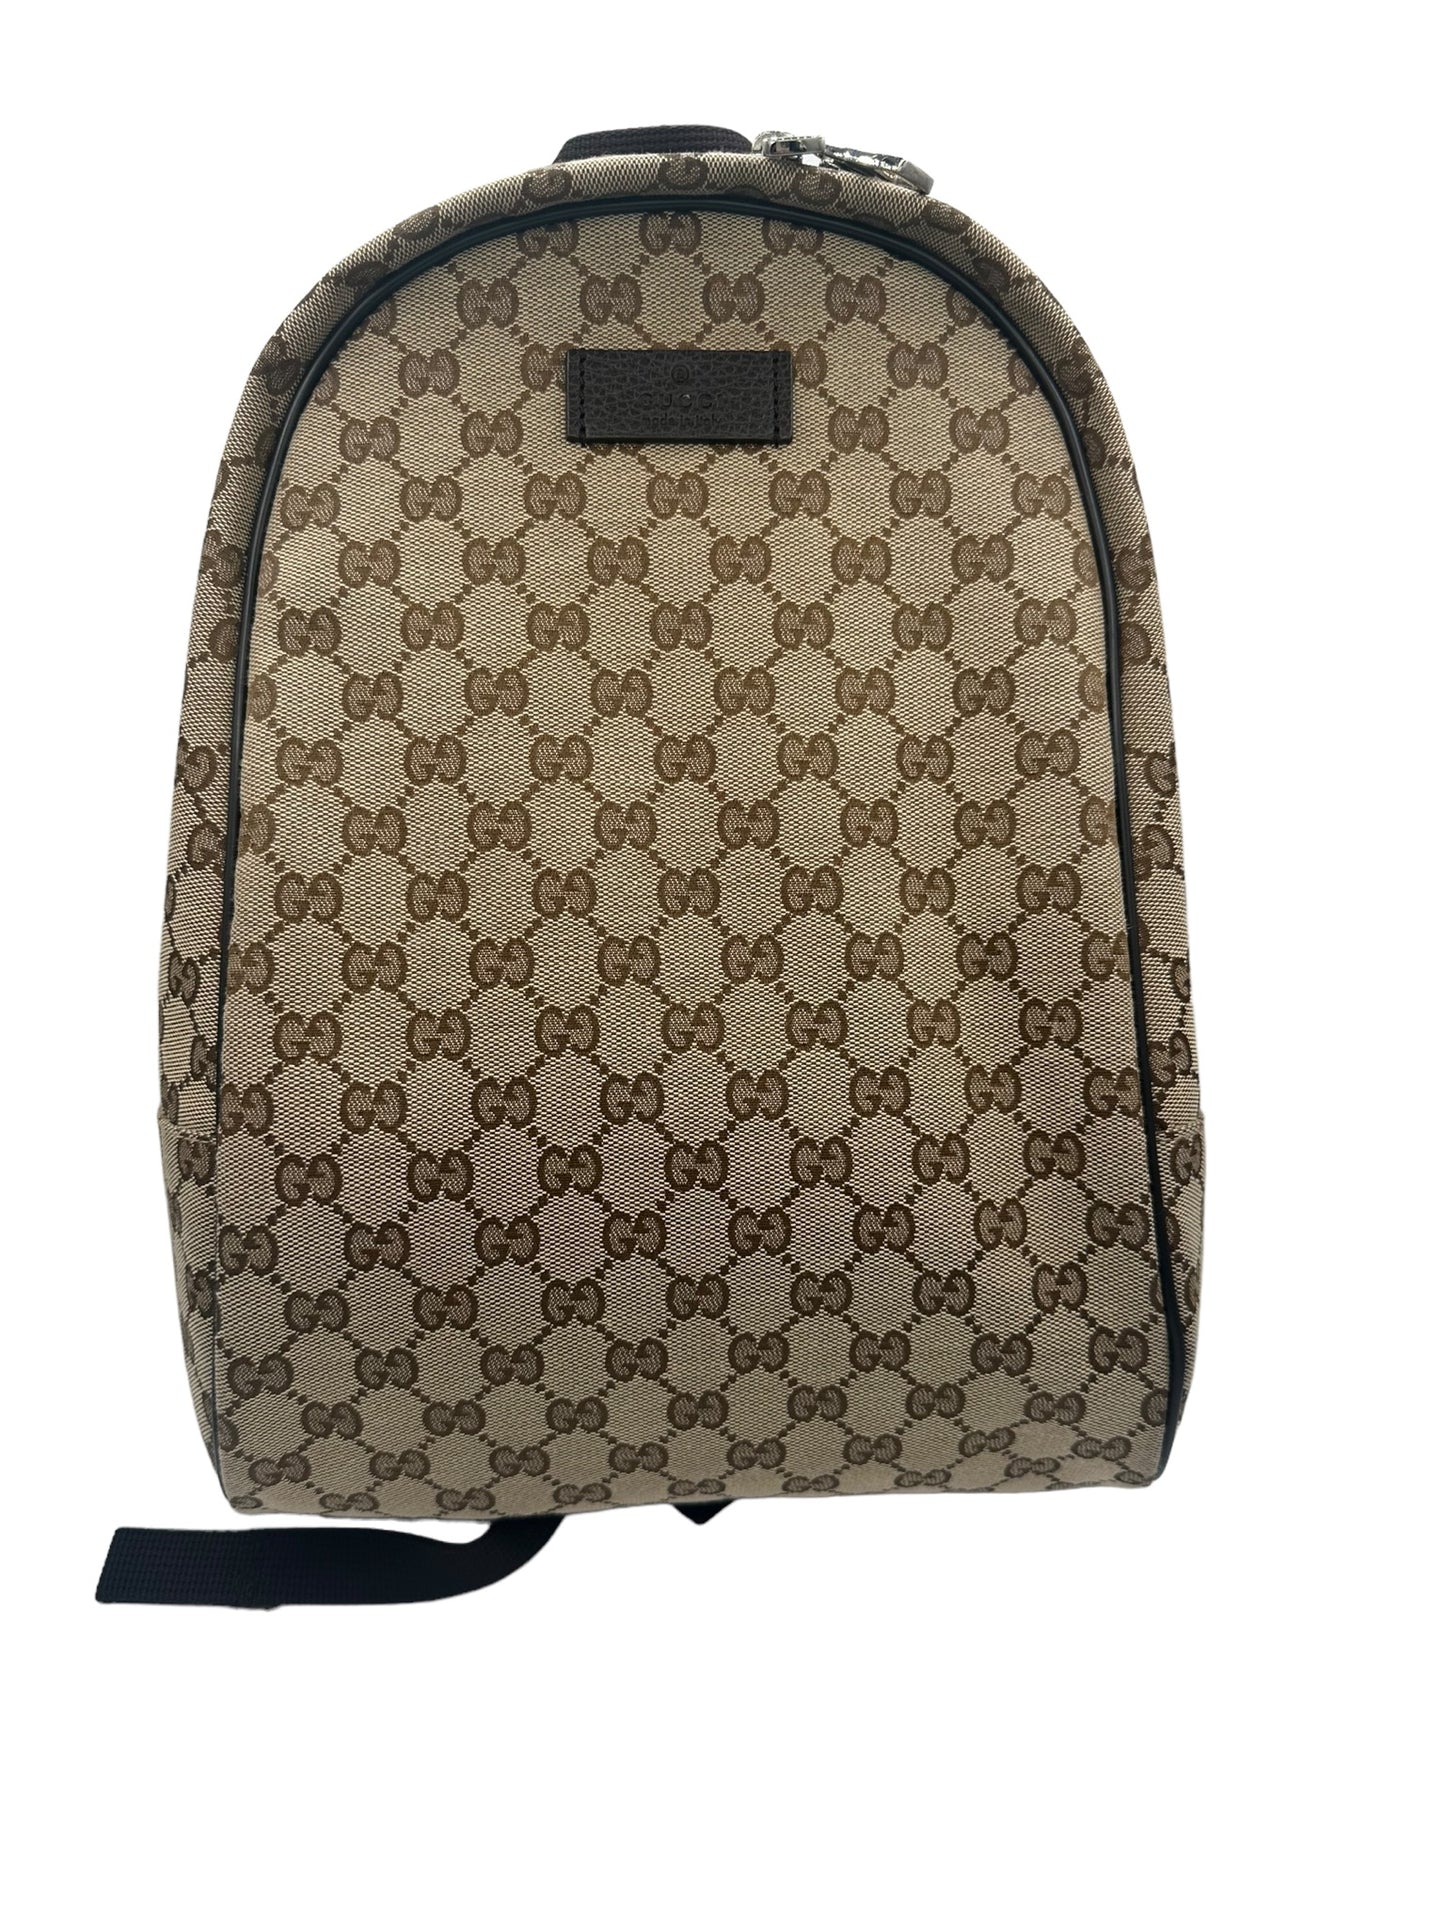 GUCCI - GG Canvas Leather Trim Backpack